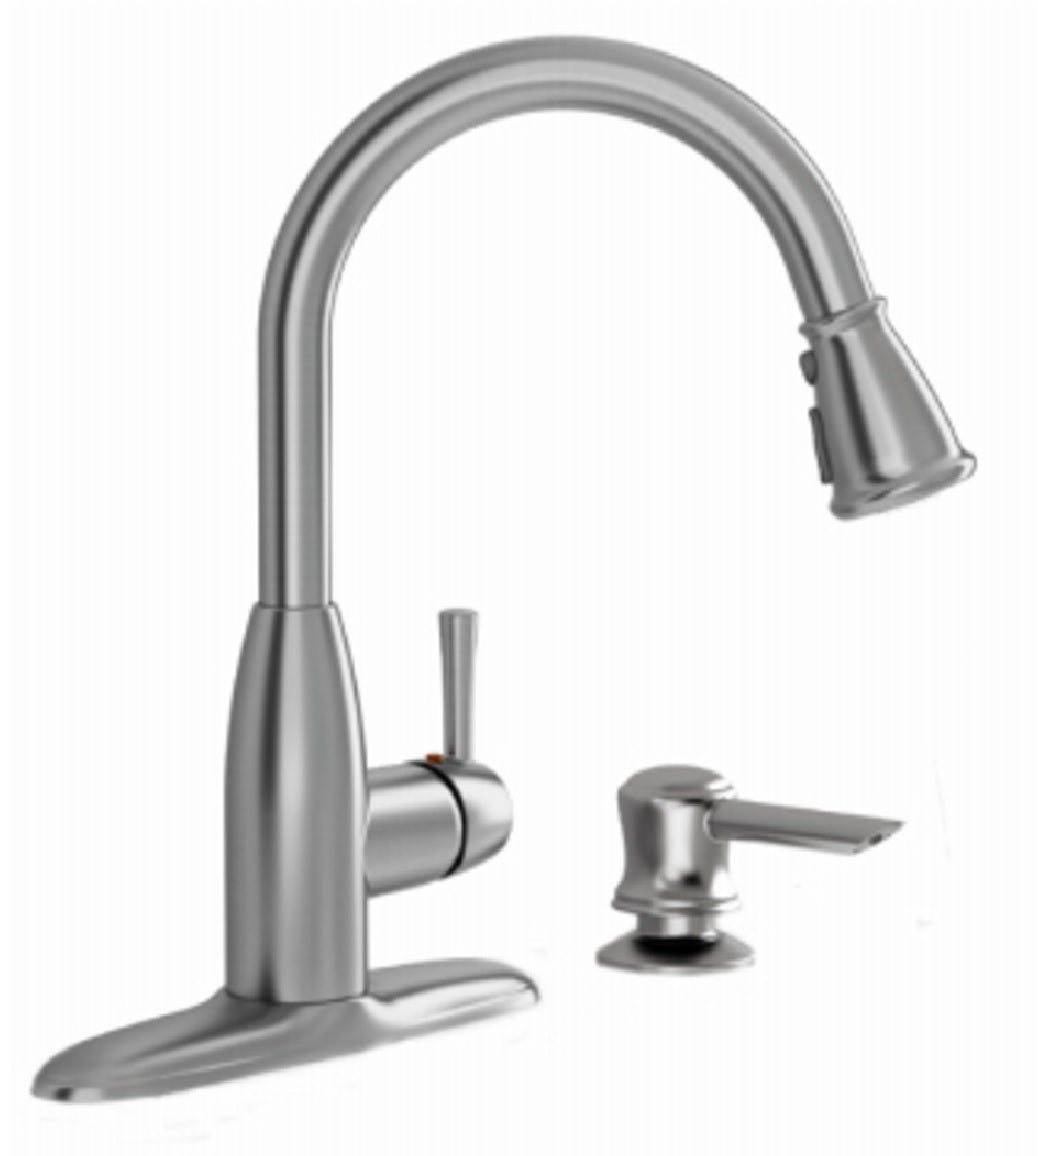 American Standard 9319300.075 Kitchen Faucet and Soap Dispenser, Stainless Steel